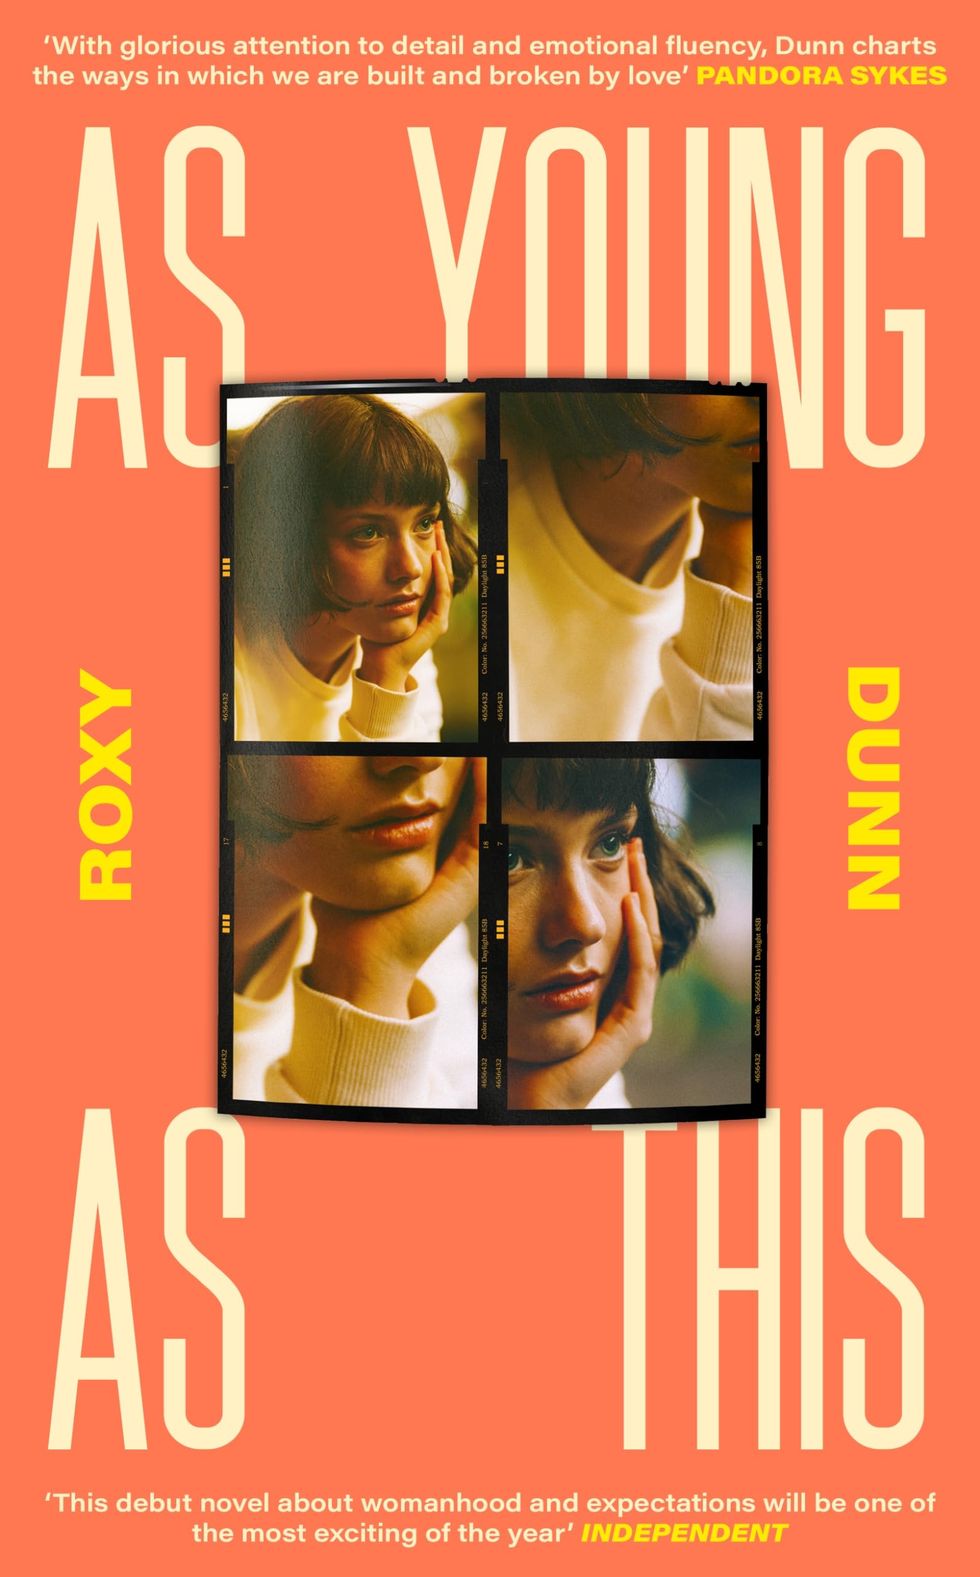 As Young as This by Roxy Dunn